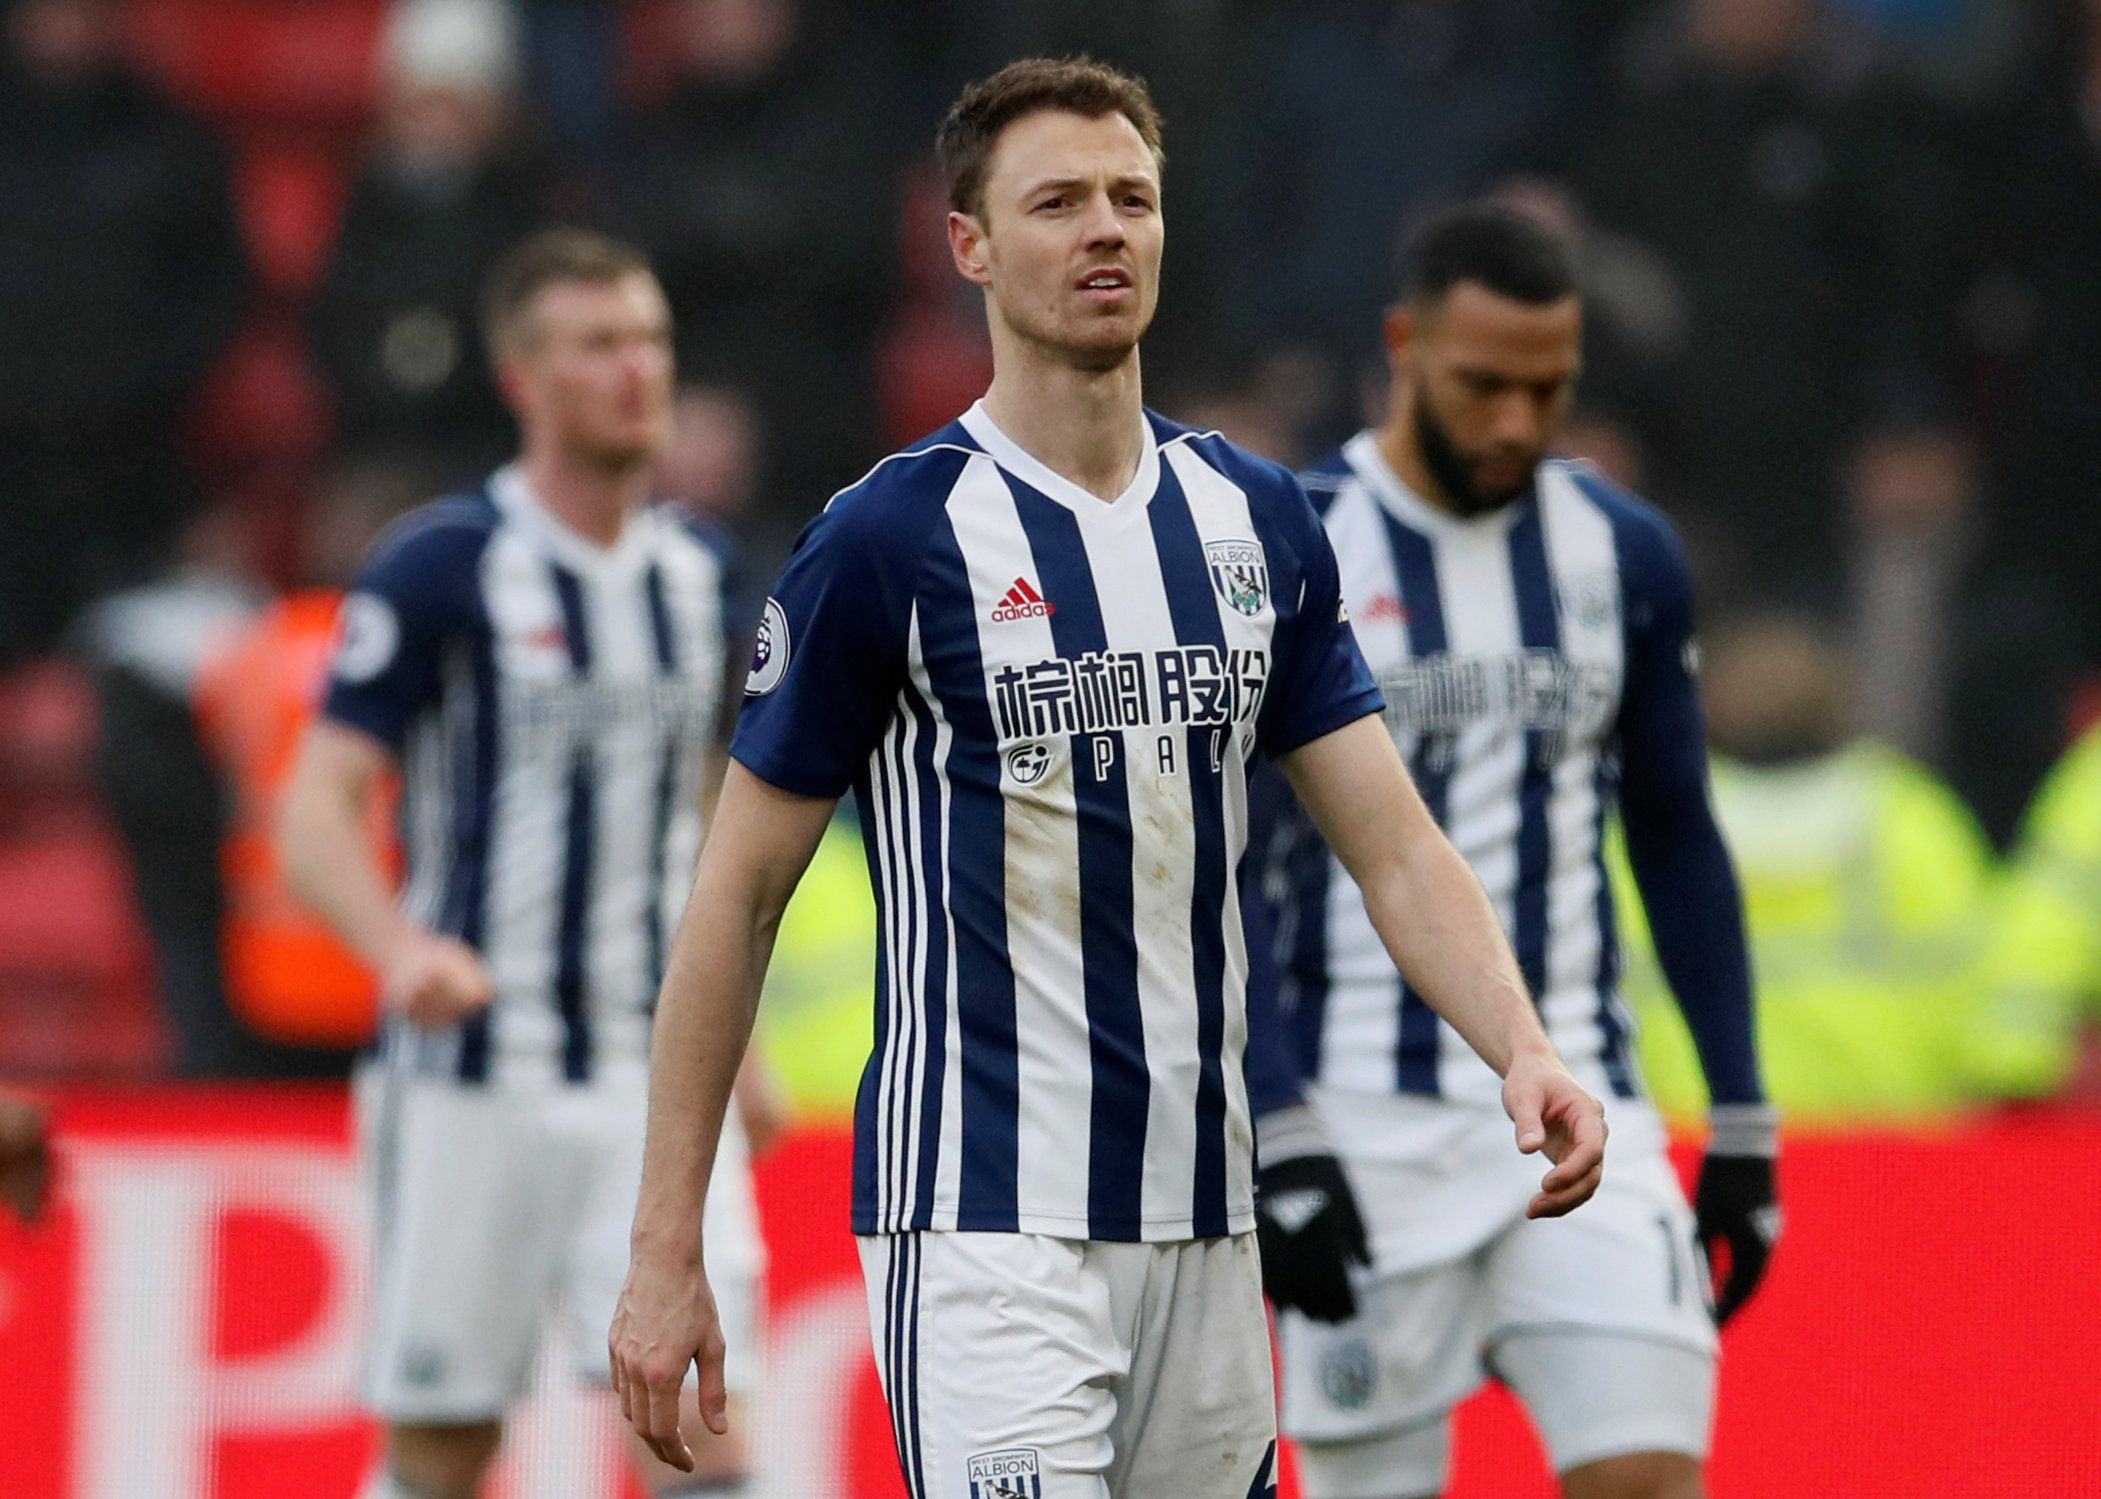 Soccer Football - Premier League - Watford vs West Bromwich Albion - Vicarage Road, Watford, Britain - March 3, 2018   West Bromwich Albion's Jonny Evans looks dejected after the match                    REUTERS/David Klein    EDITORIAL USE ONLY. No use with unauthorized audio, video, data, fixture lists, club/league logos or 